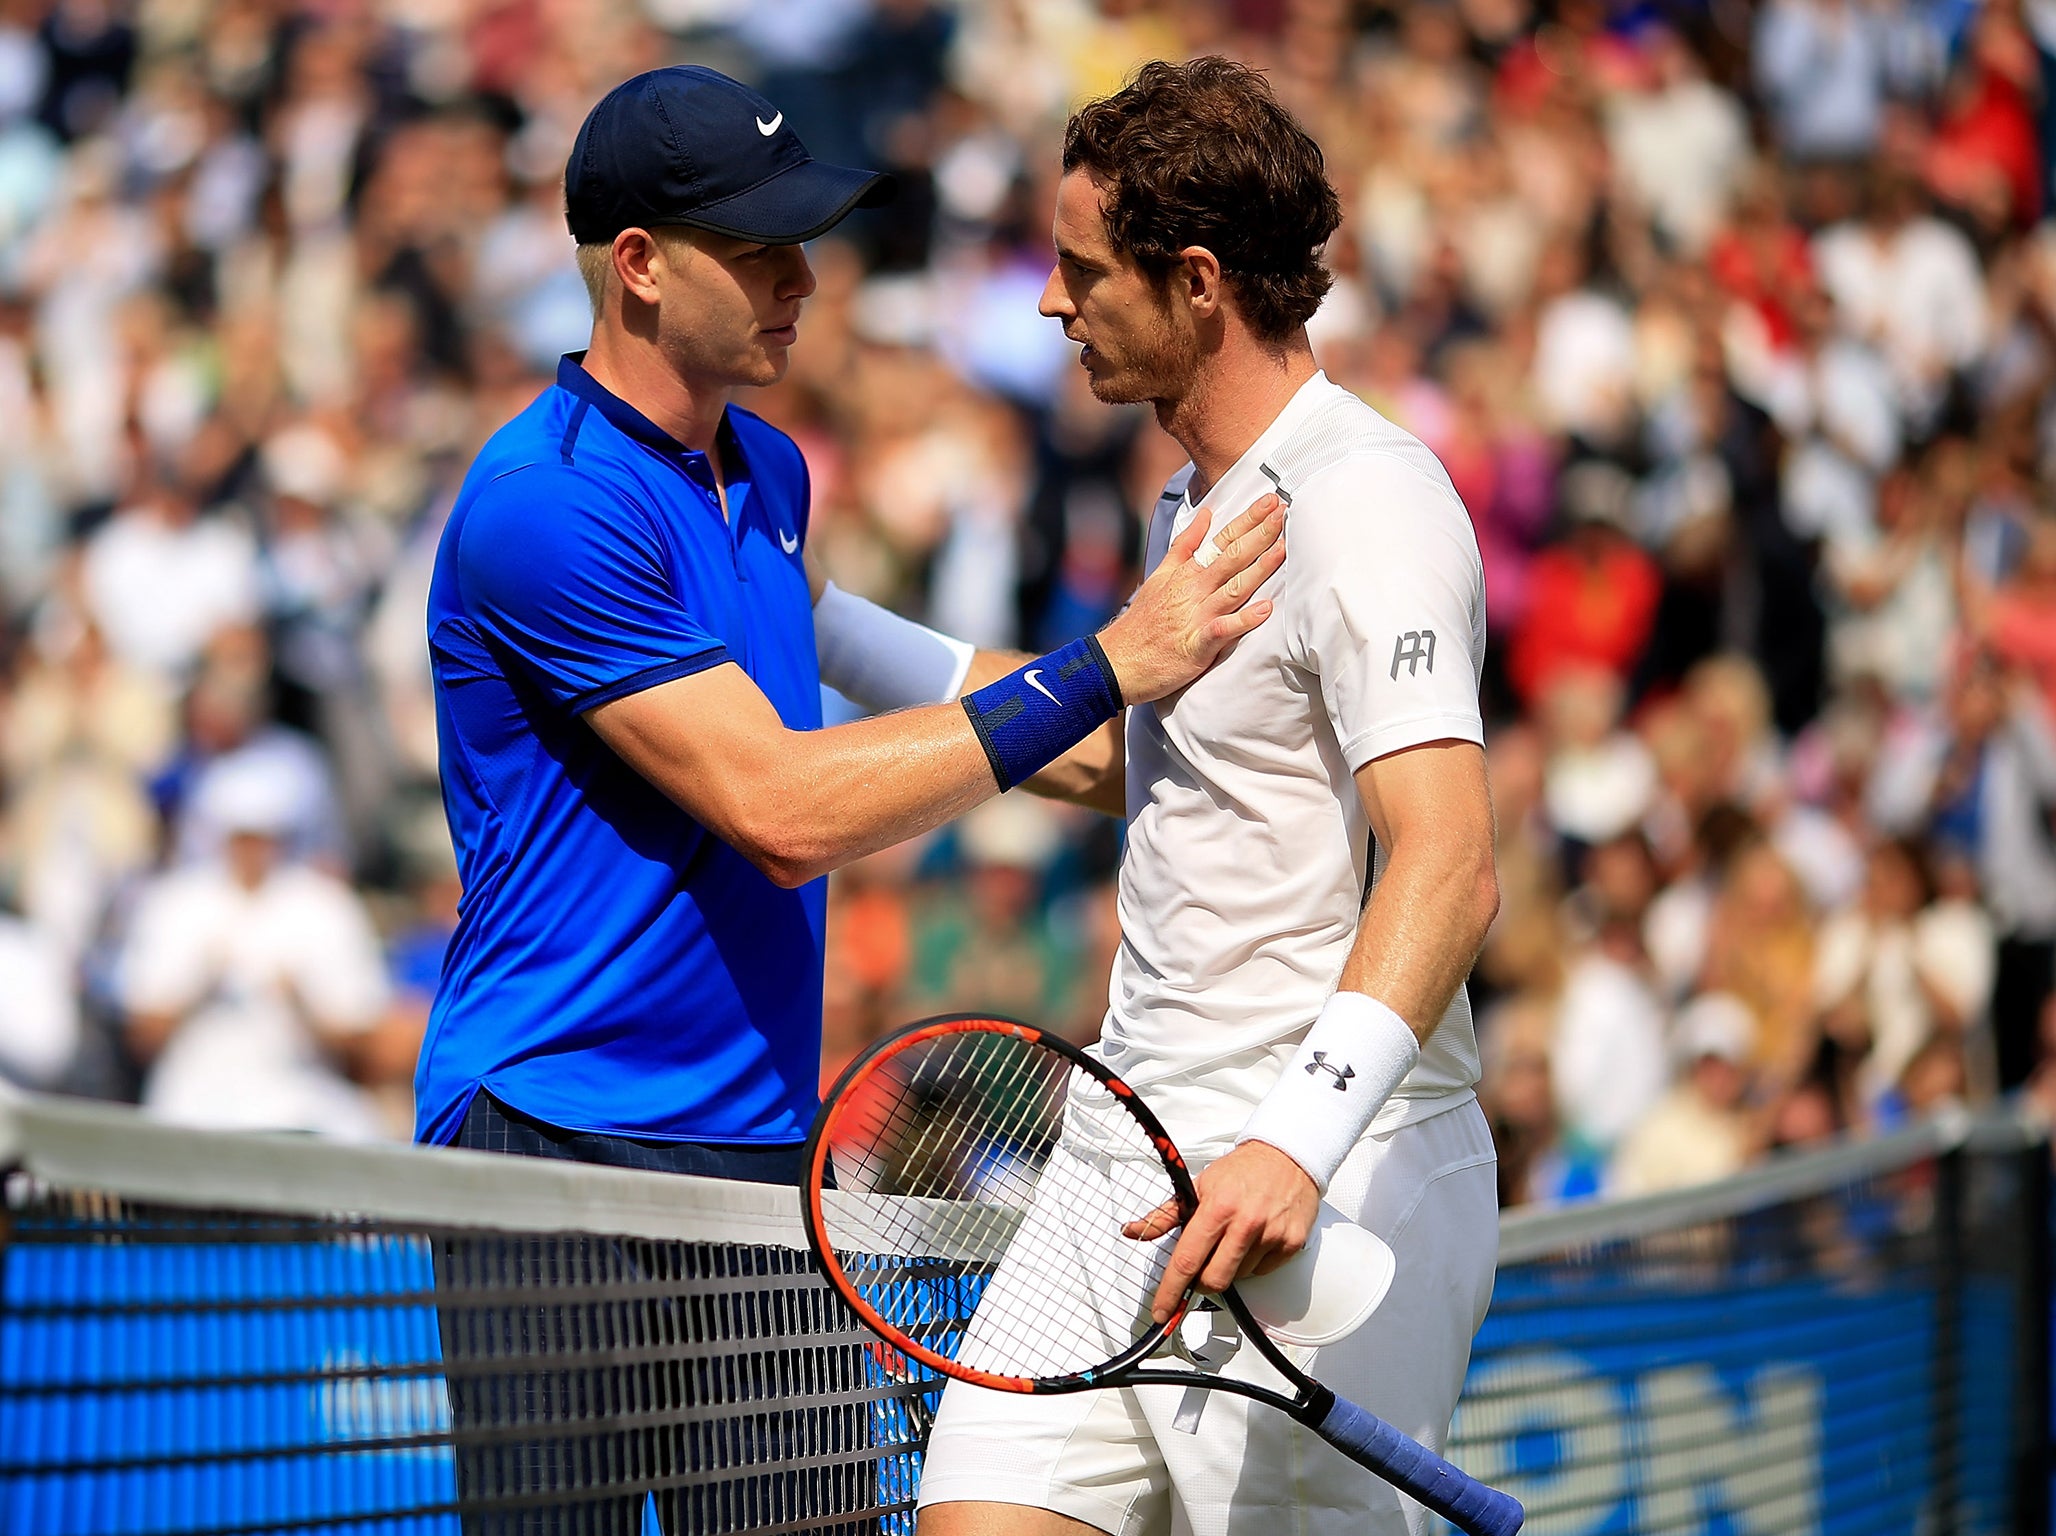 Going up, going down: Edmund has replaced Murray as the British number one